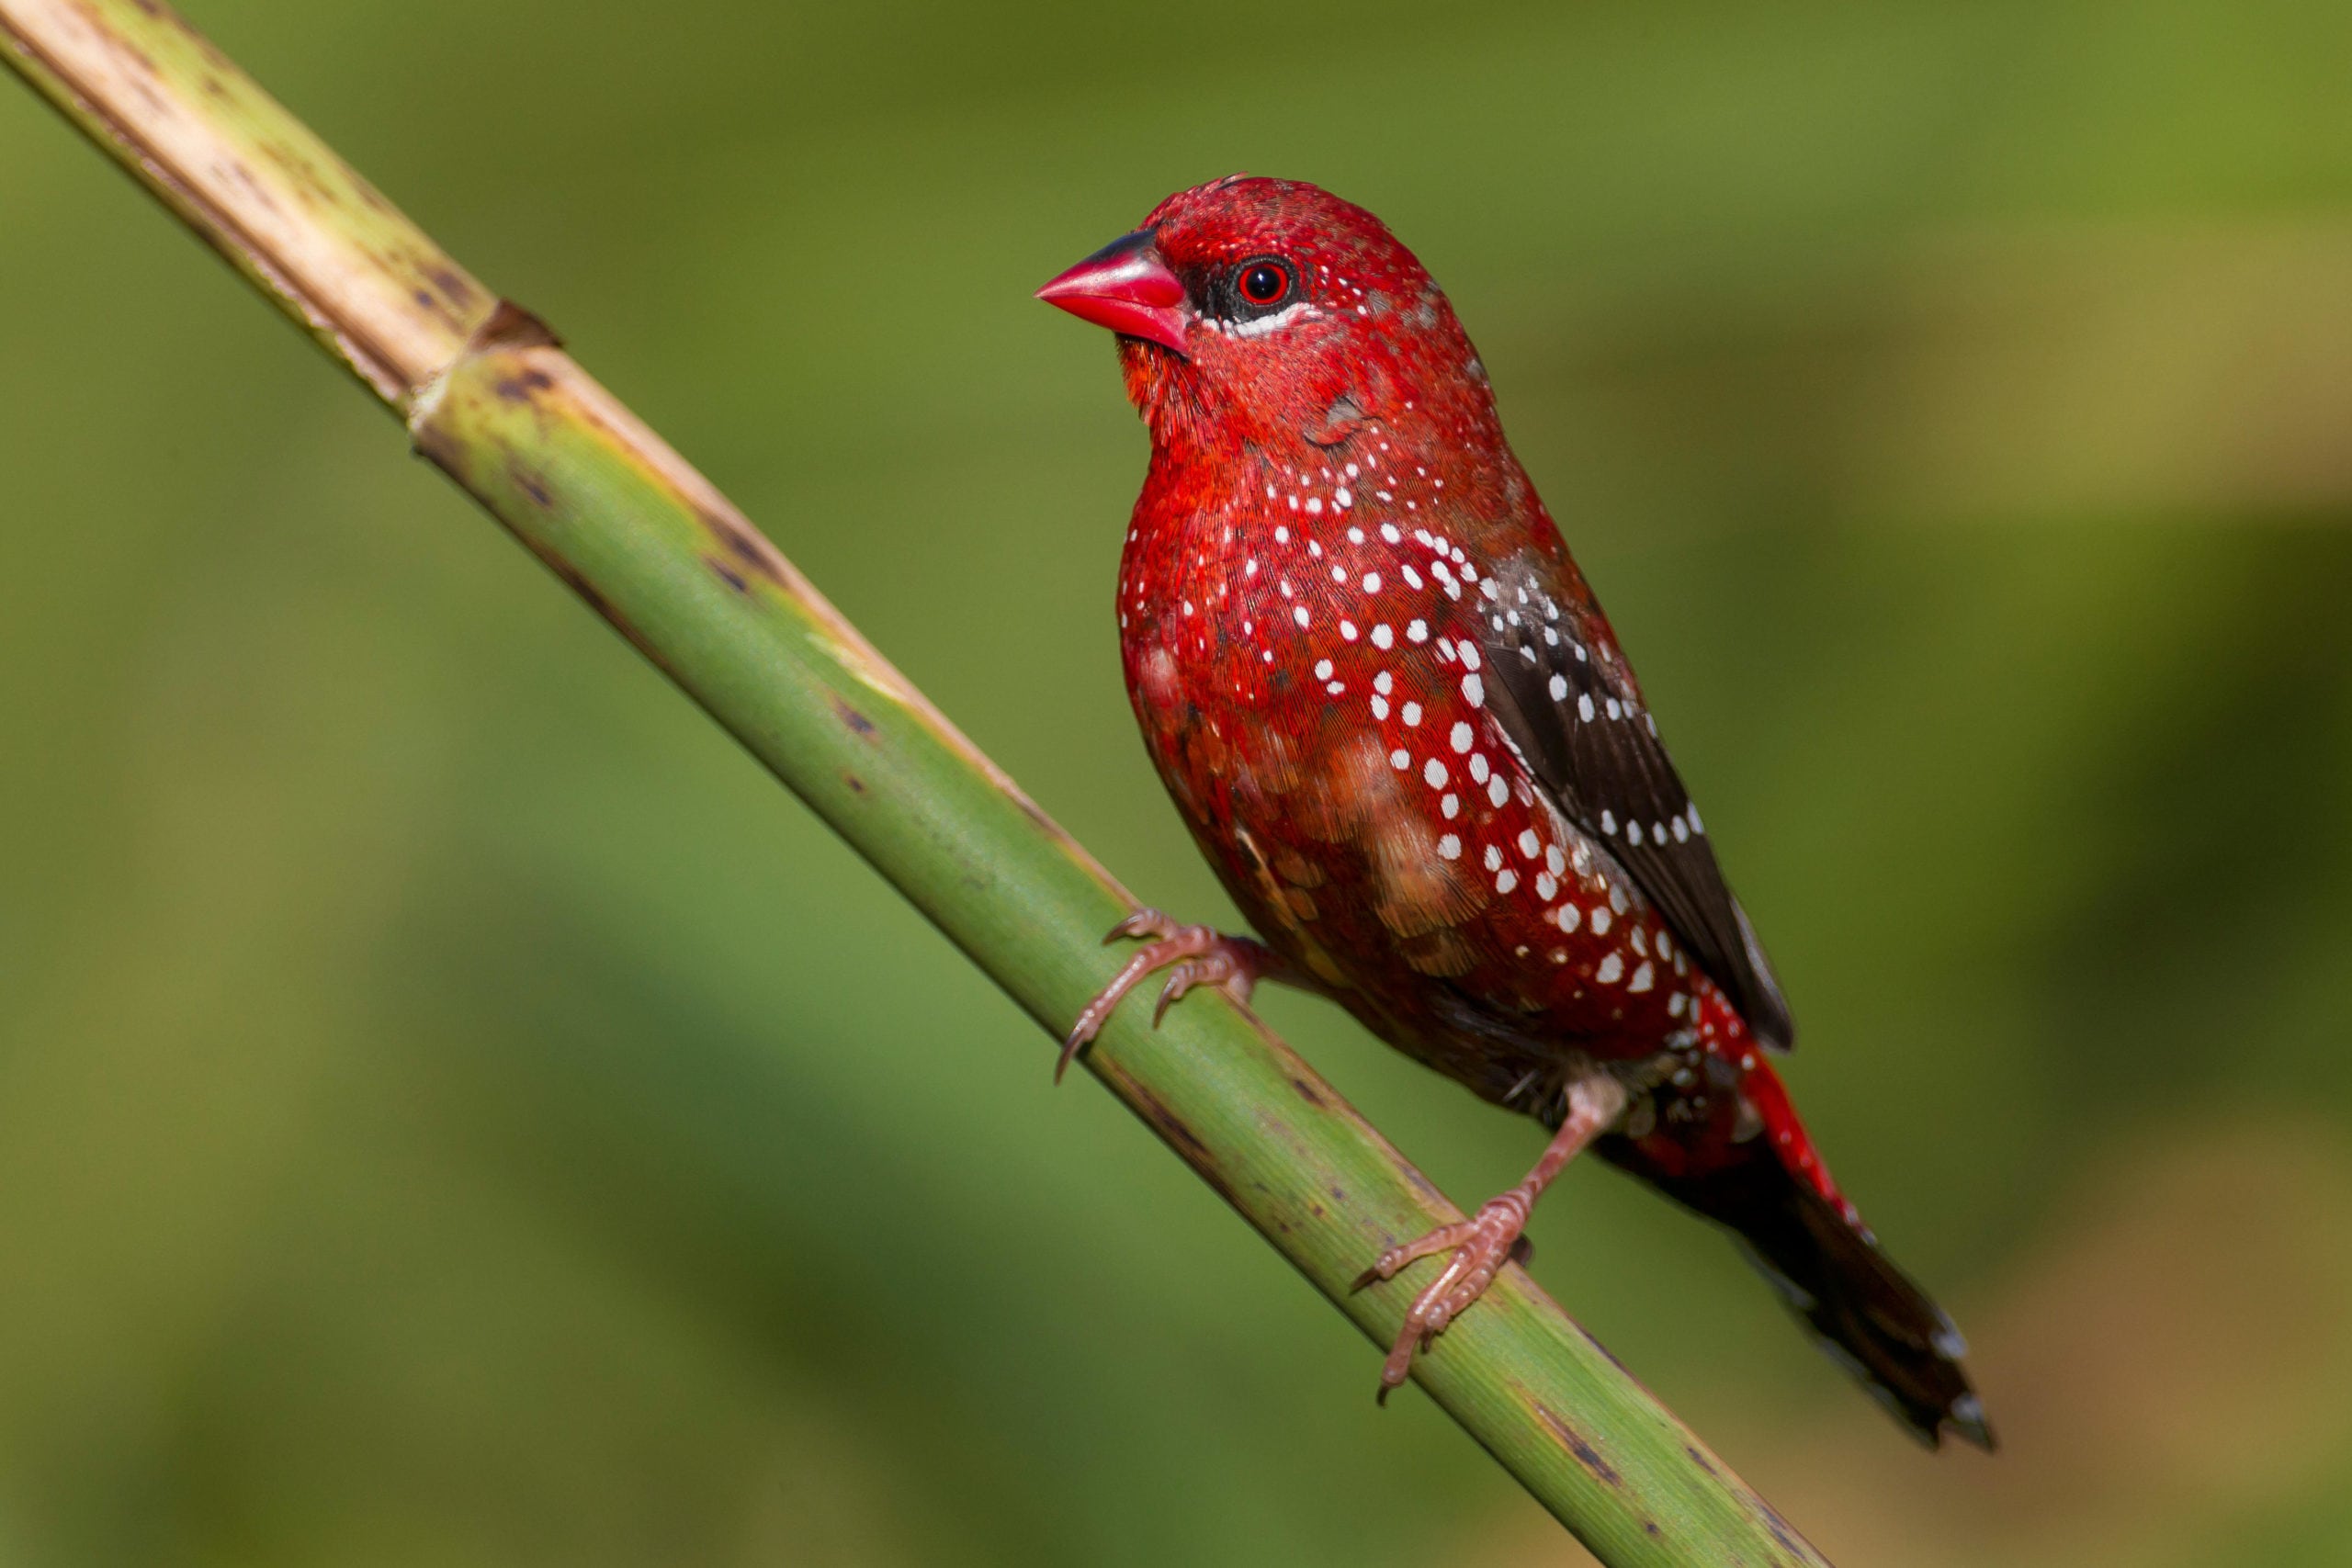 The red strawberry finch is the sweetest songbird - Australian Geographic